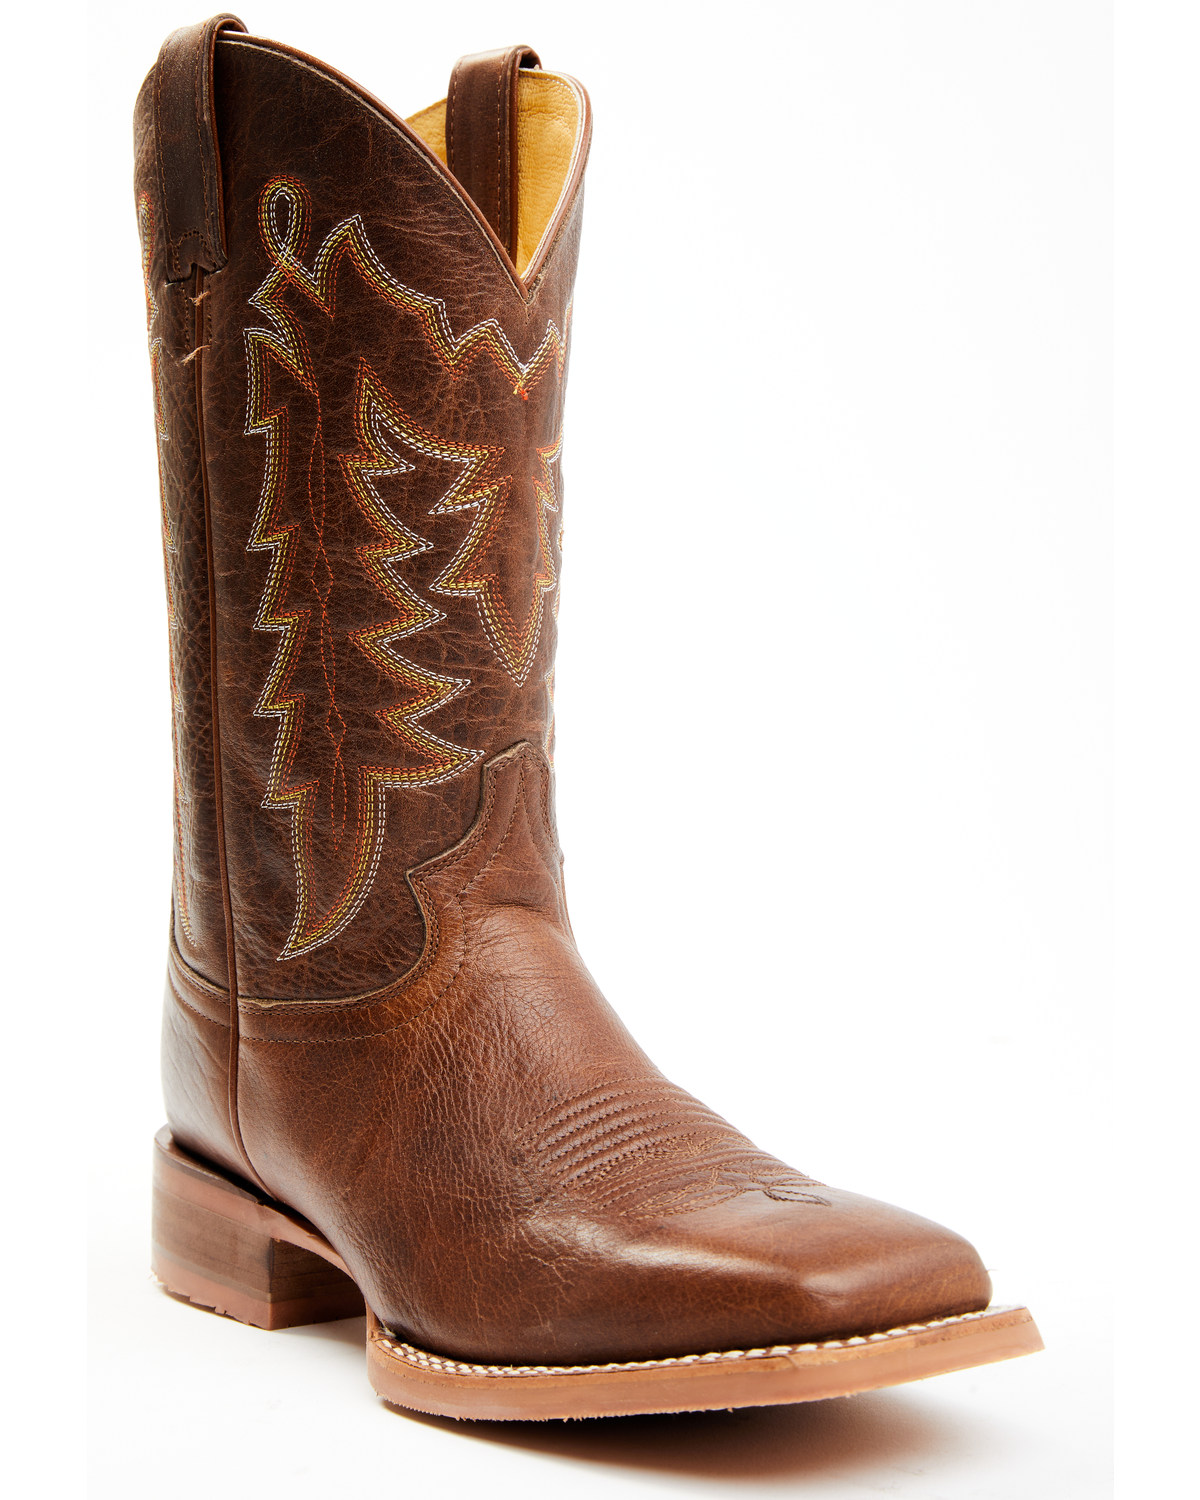 Justin Men's Carsen Camel Brown Cowhide Performance Leather Western Boots - Square Toe